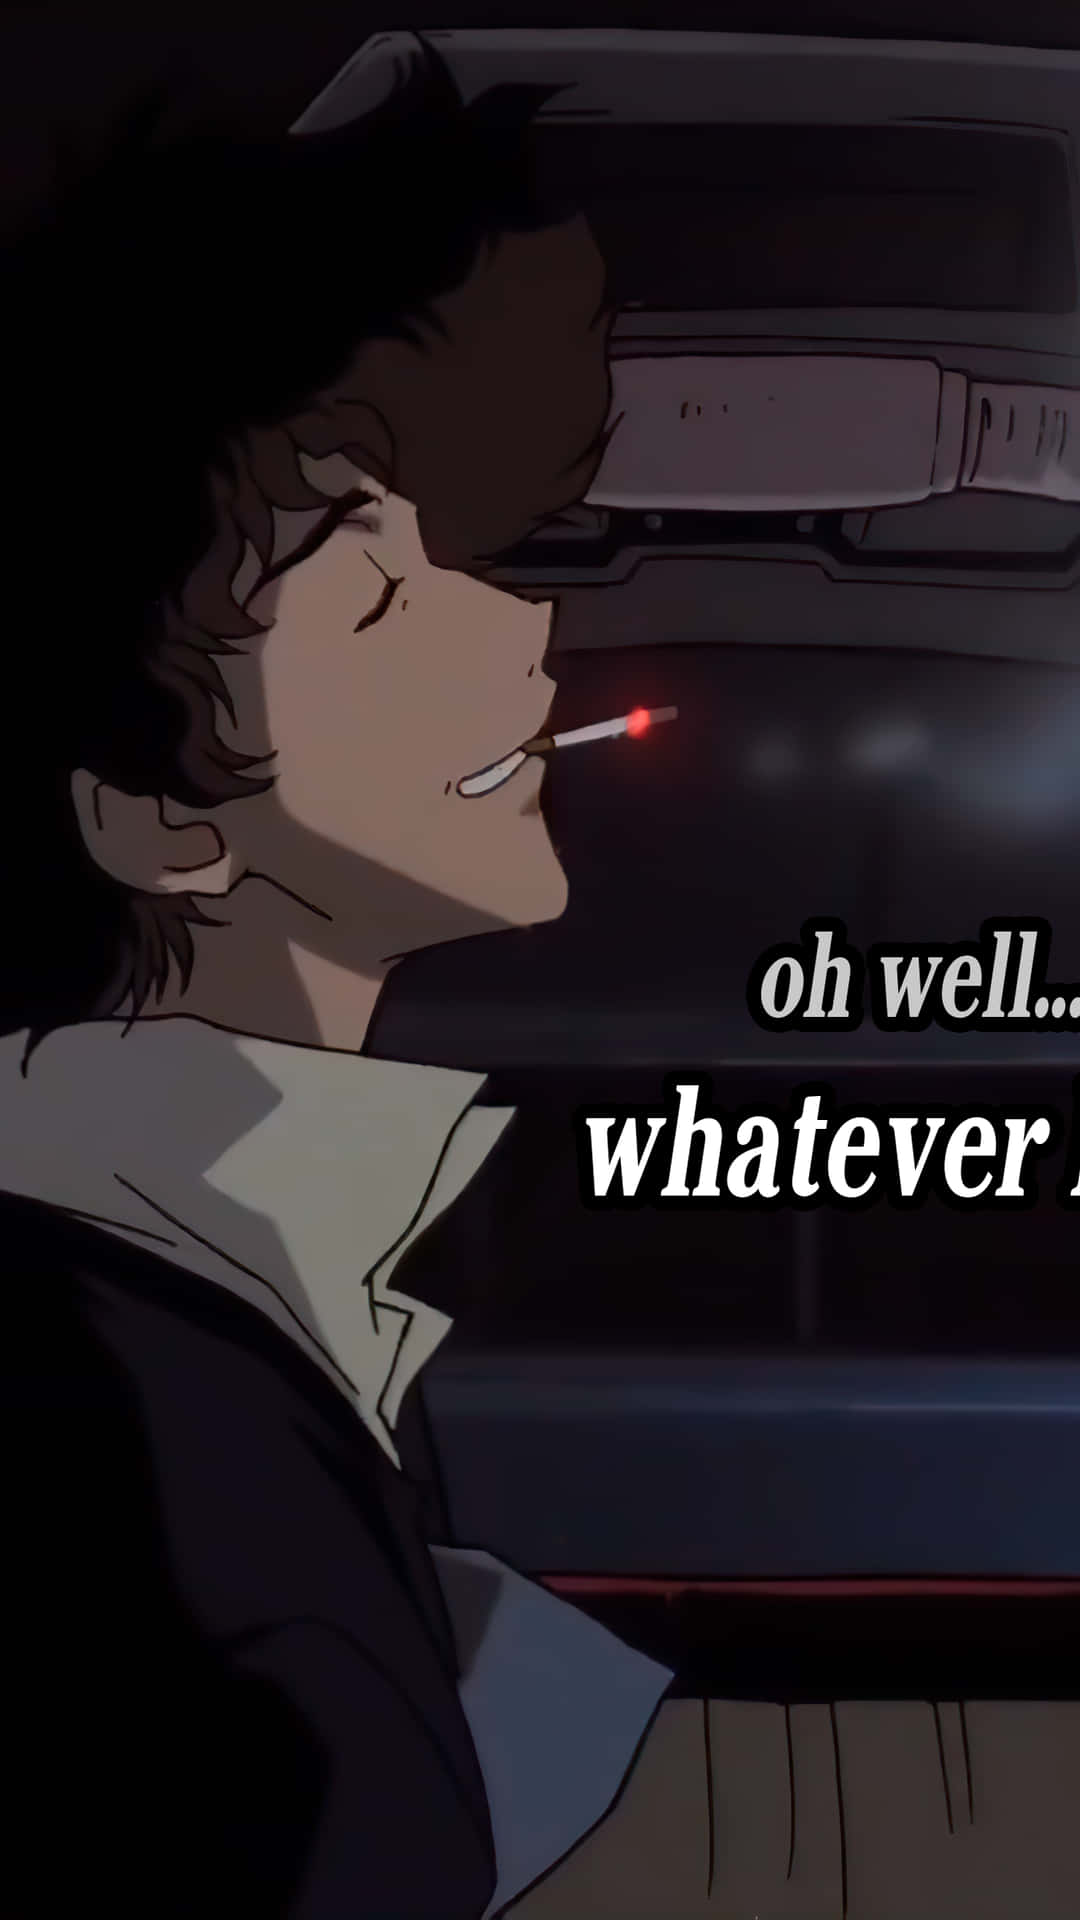 Get ready for adventure with Cowboy Bebop iPhone! Wallpaper